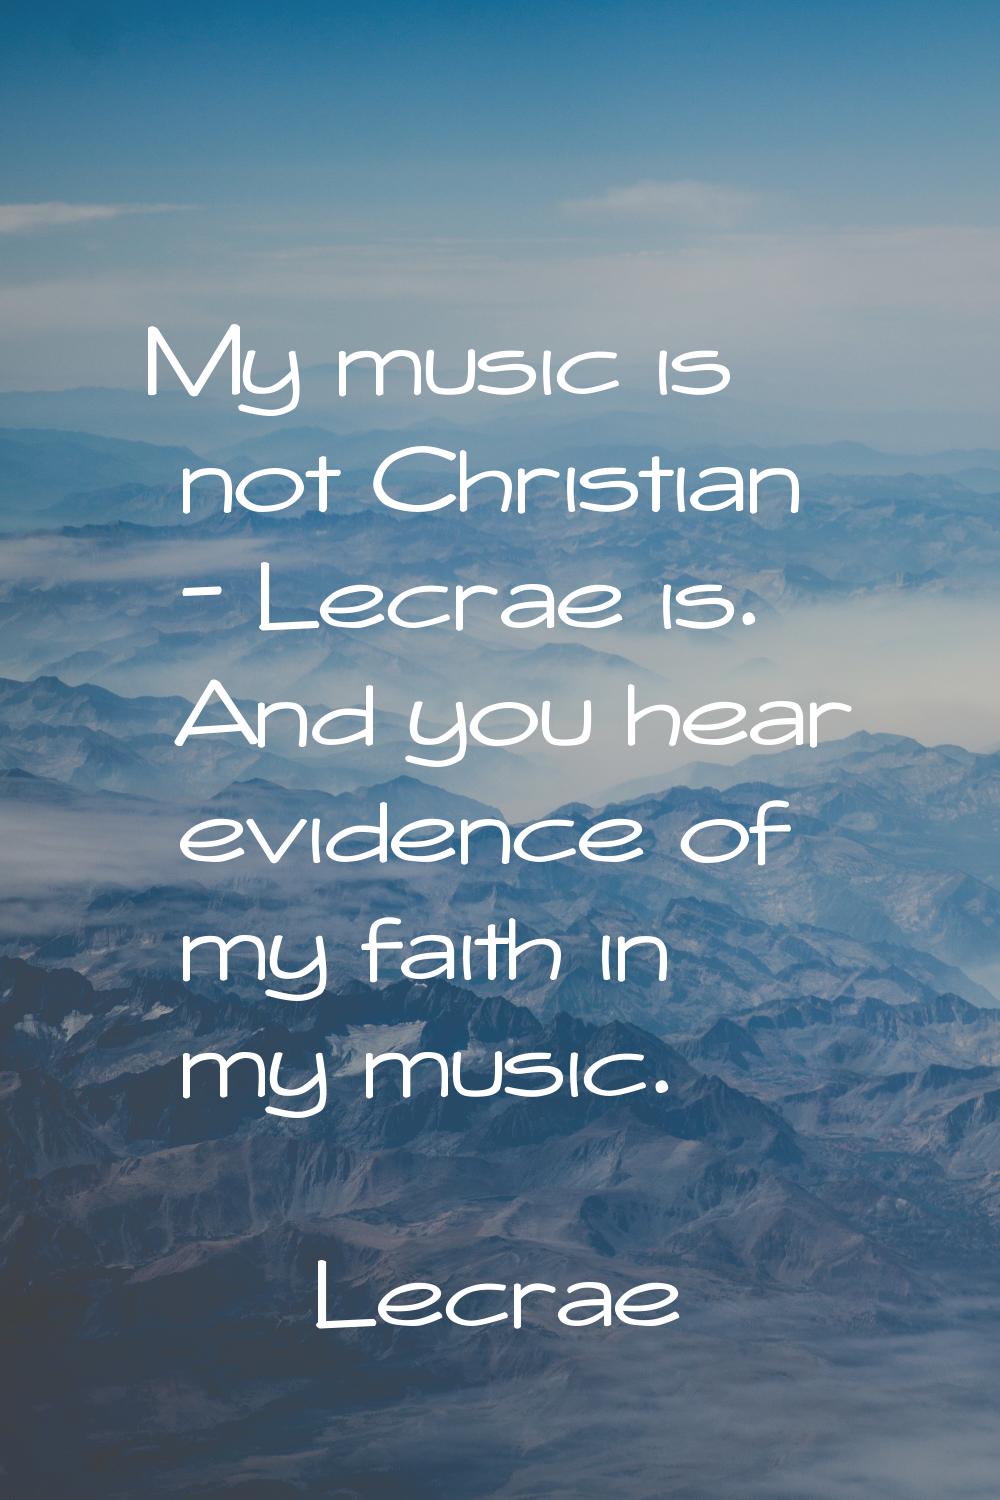 My music is not Christian - Lecrae is. And you hear evidence of my faith in my music.